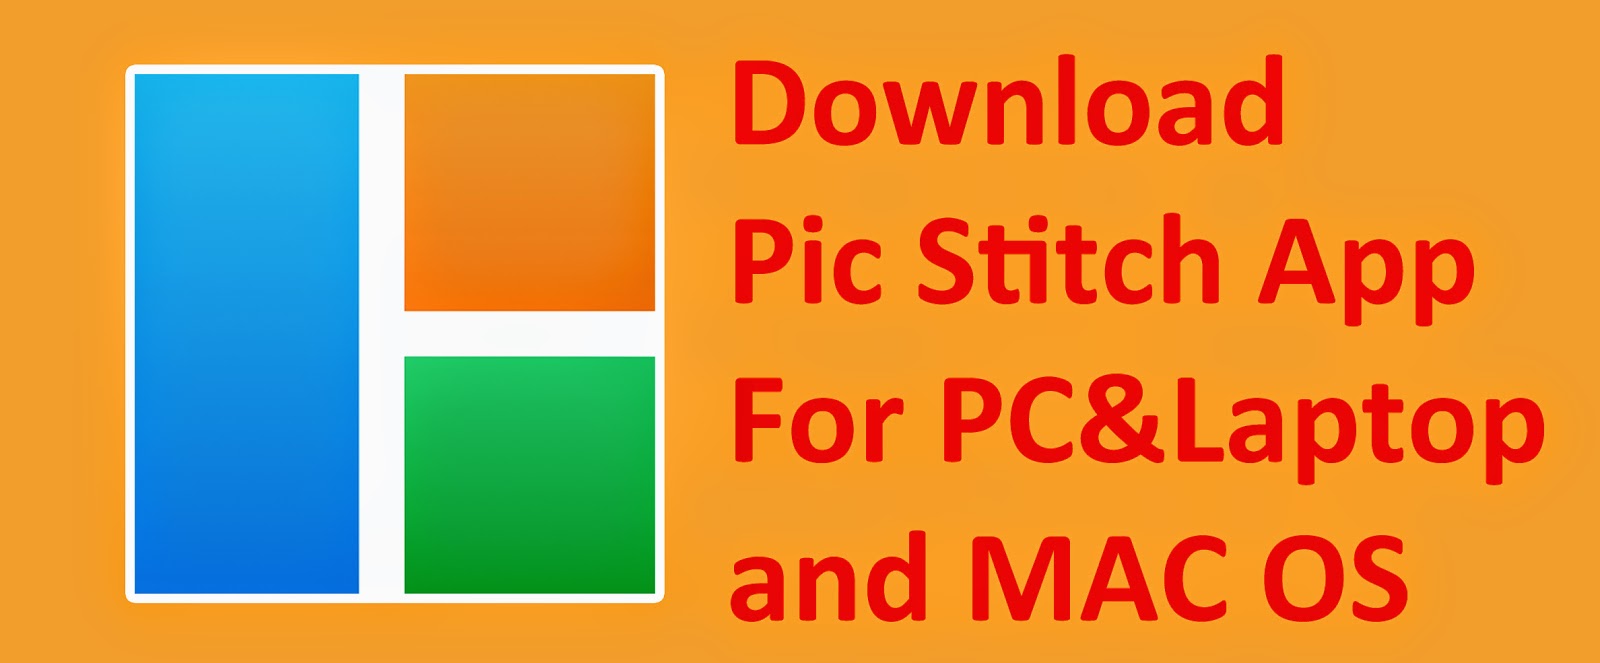 Download Pic Stitch for PC